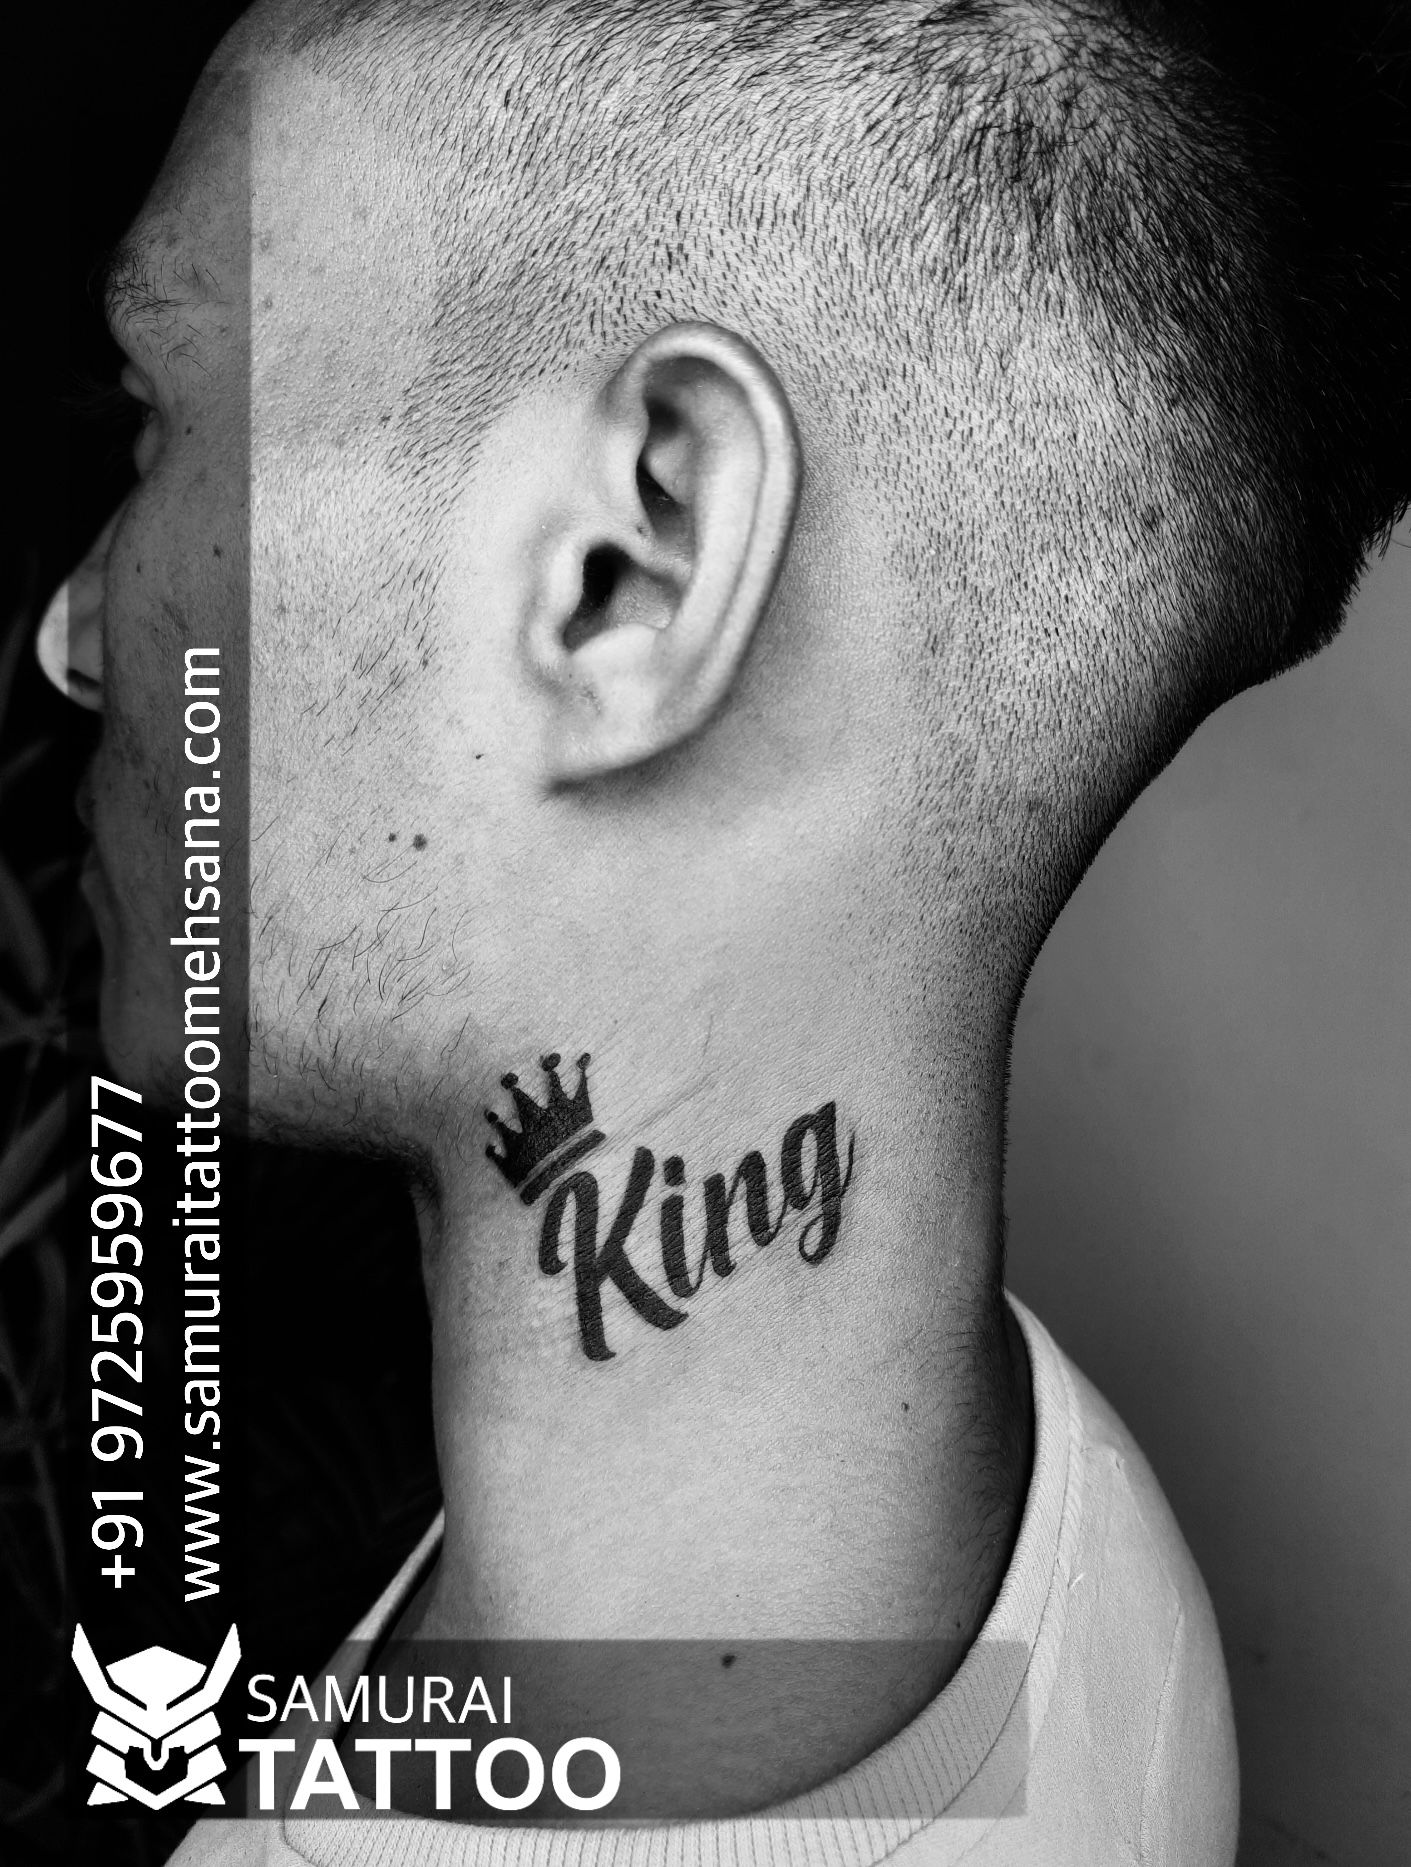 Crazy ink tattoo  Body piercing on Twitter king and queen couple tattoo  on back neck done at crazyink tattoo studio raipur kingandqueentattoo  coupletattoo necktattoo ink crazyink creativity tattooidea  raipurartist httpstcowjXJWpMW9j 